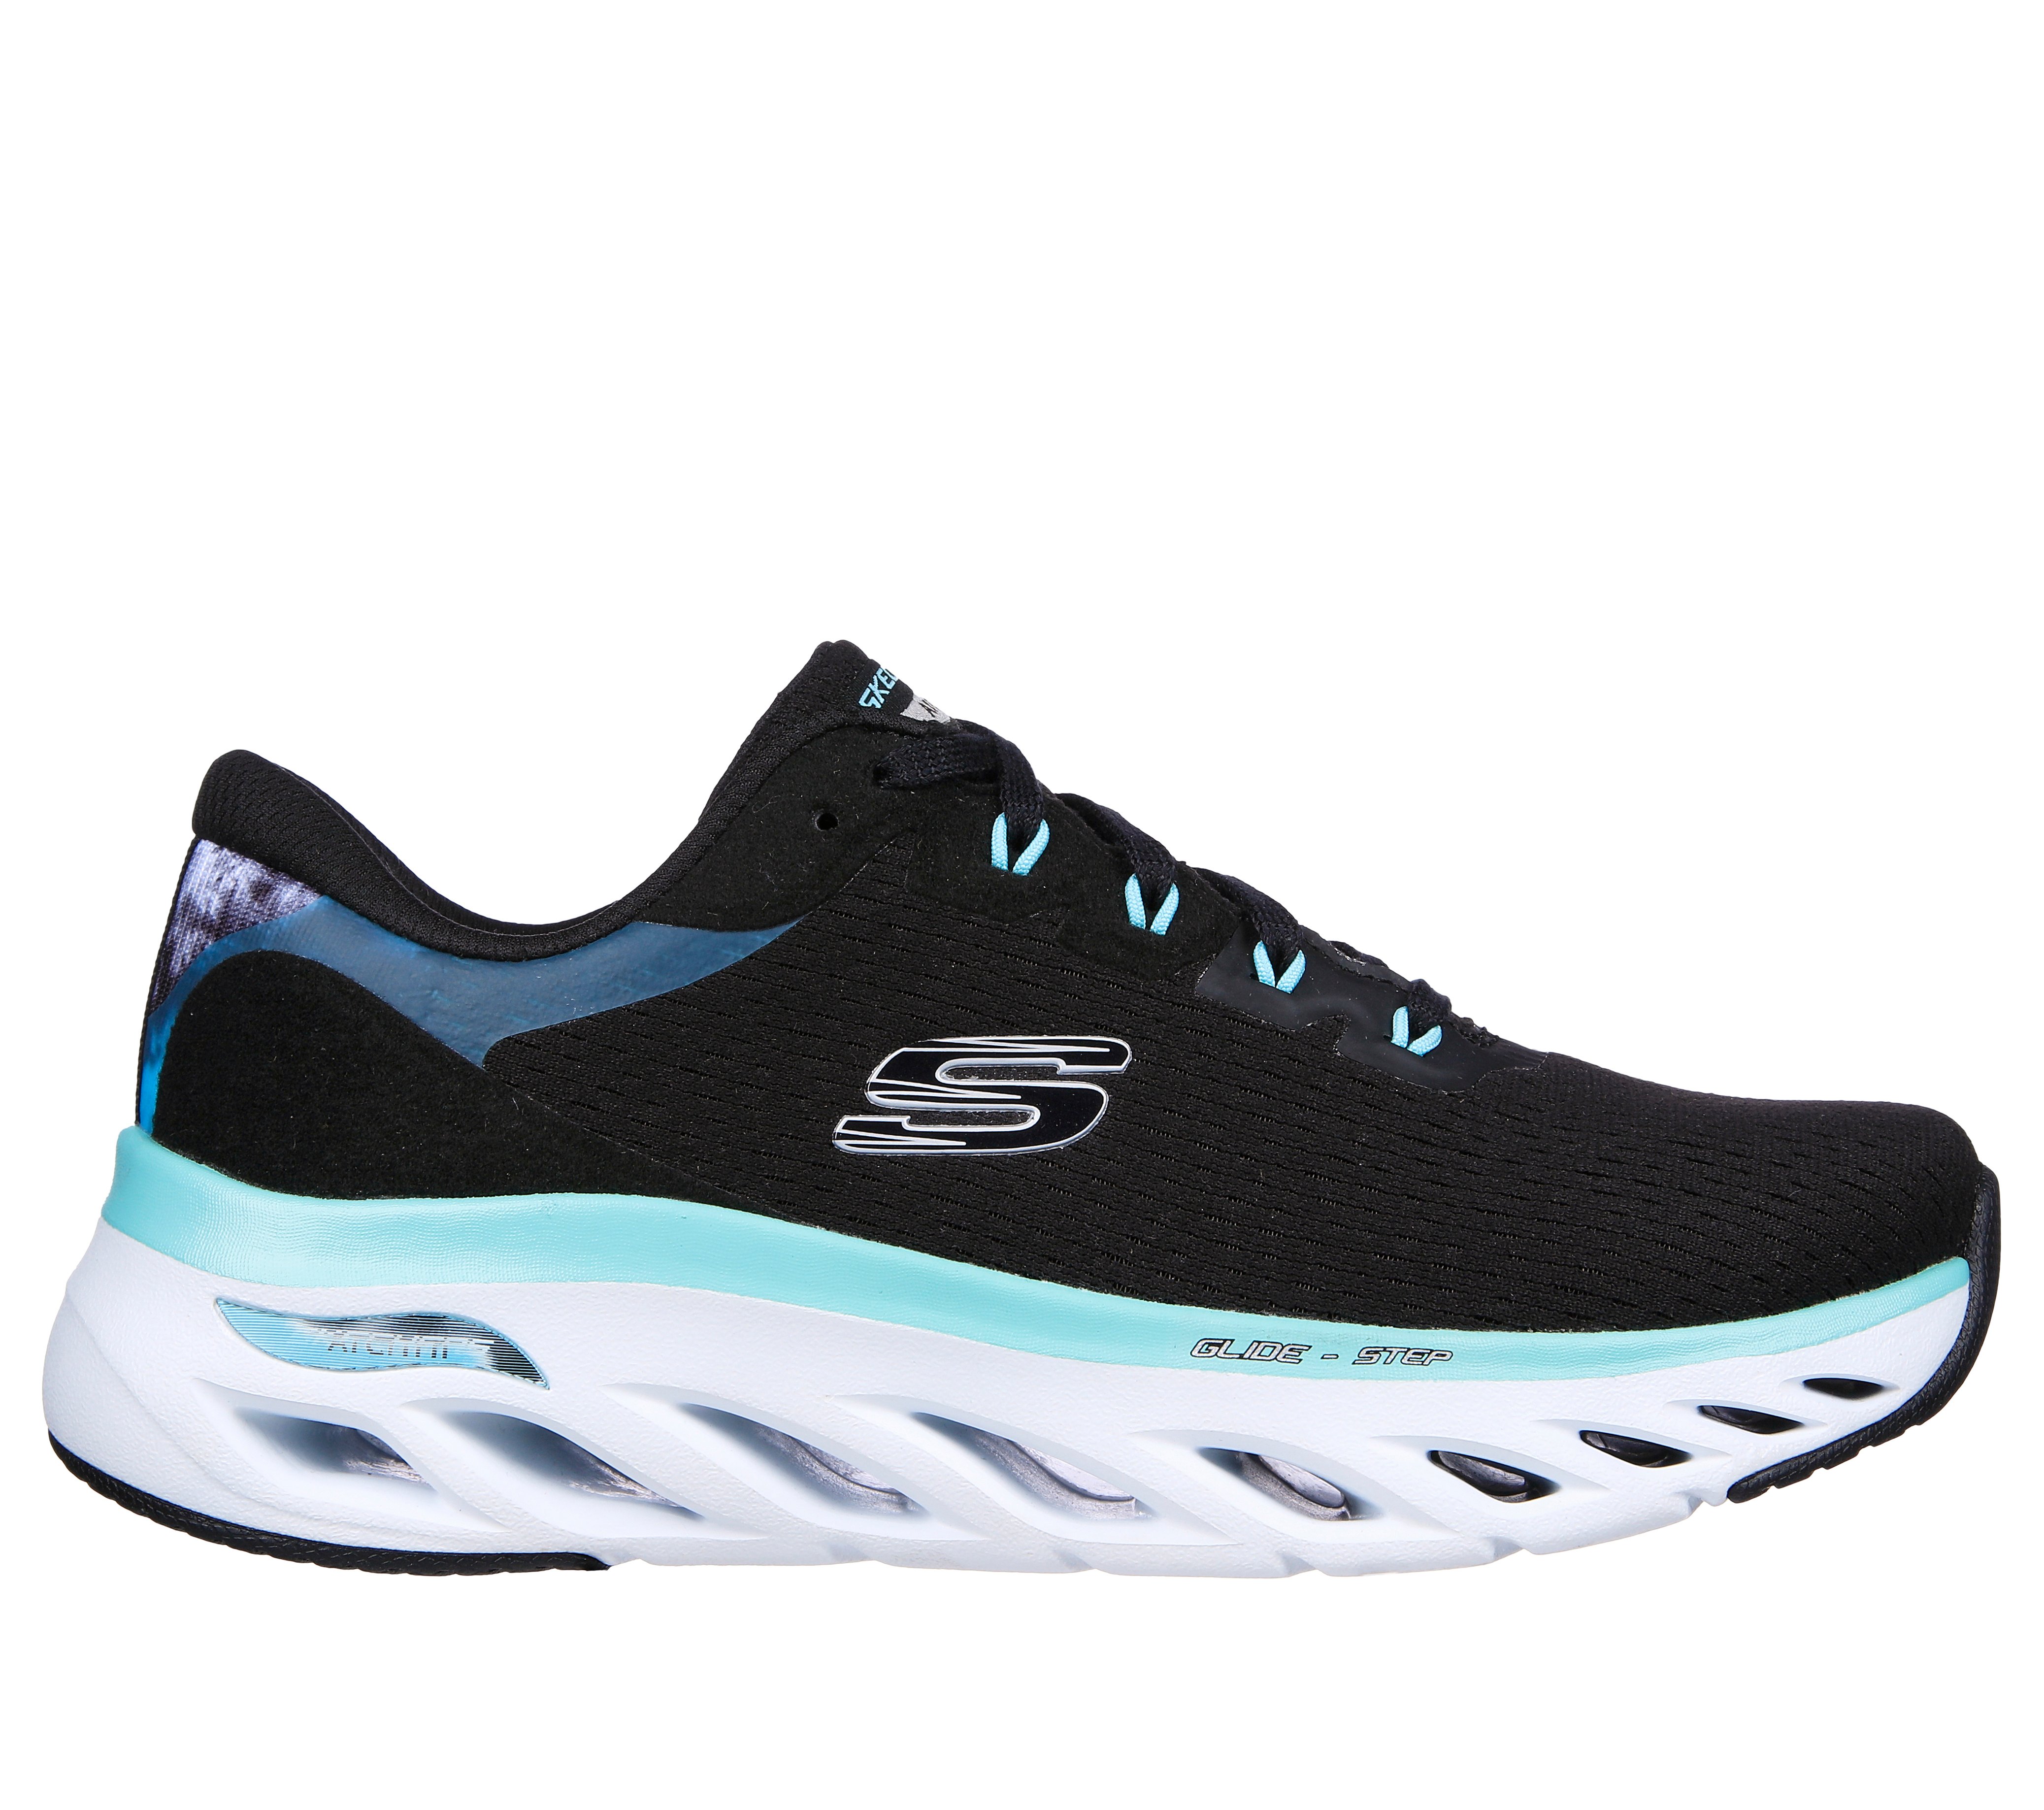 Where to Buy Arch Fit Skechers?